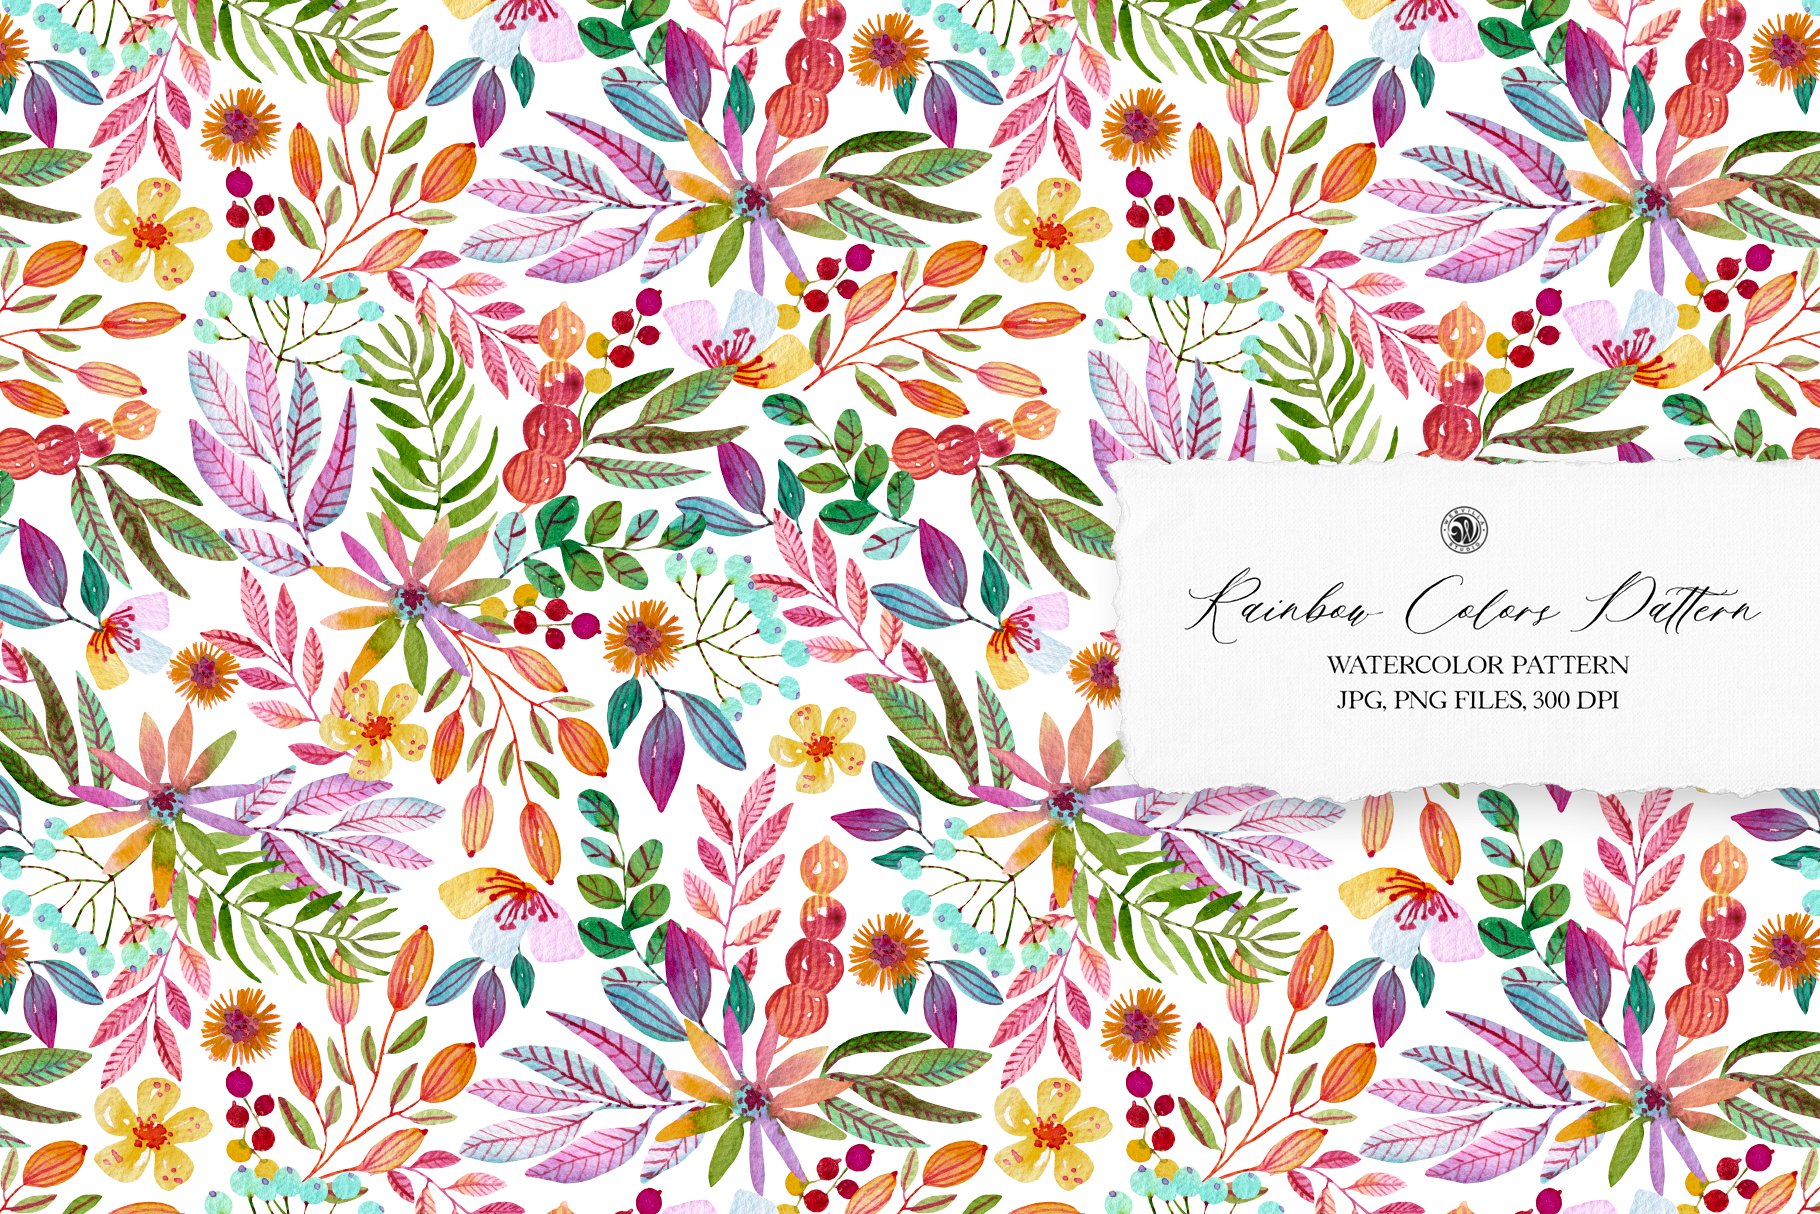 Rainbow Colors Watercolor Pattern cover image.